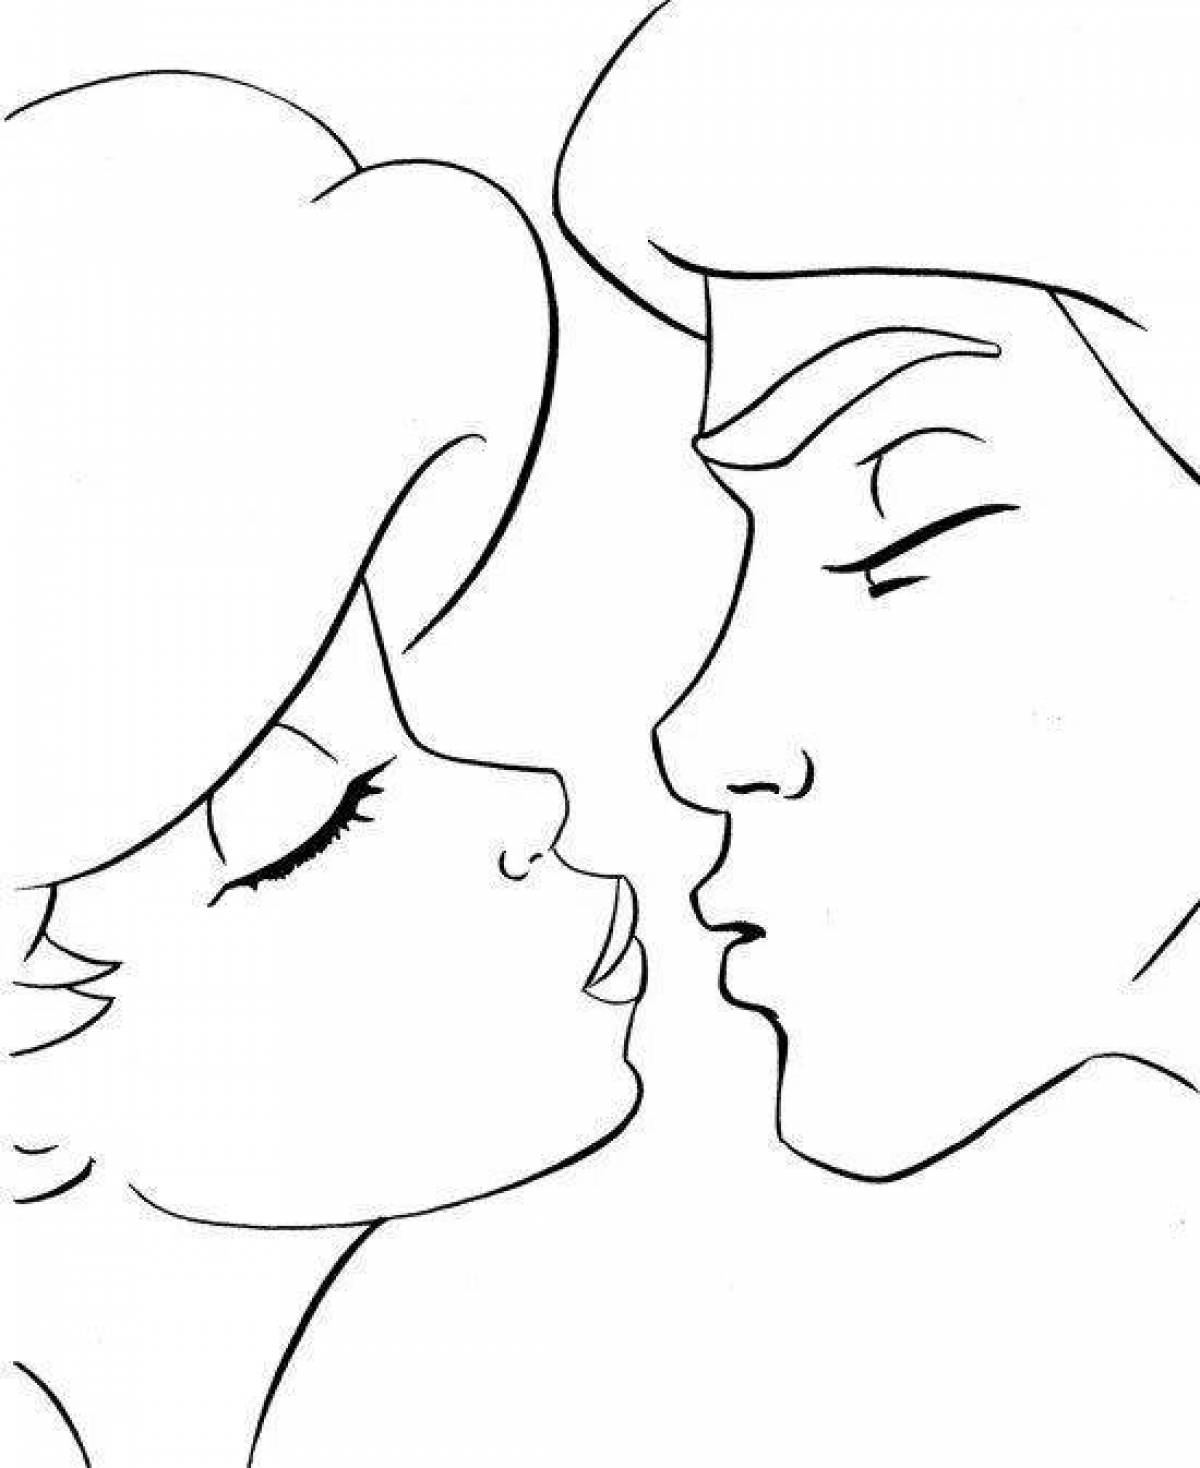 Glowing kiss coloring page